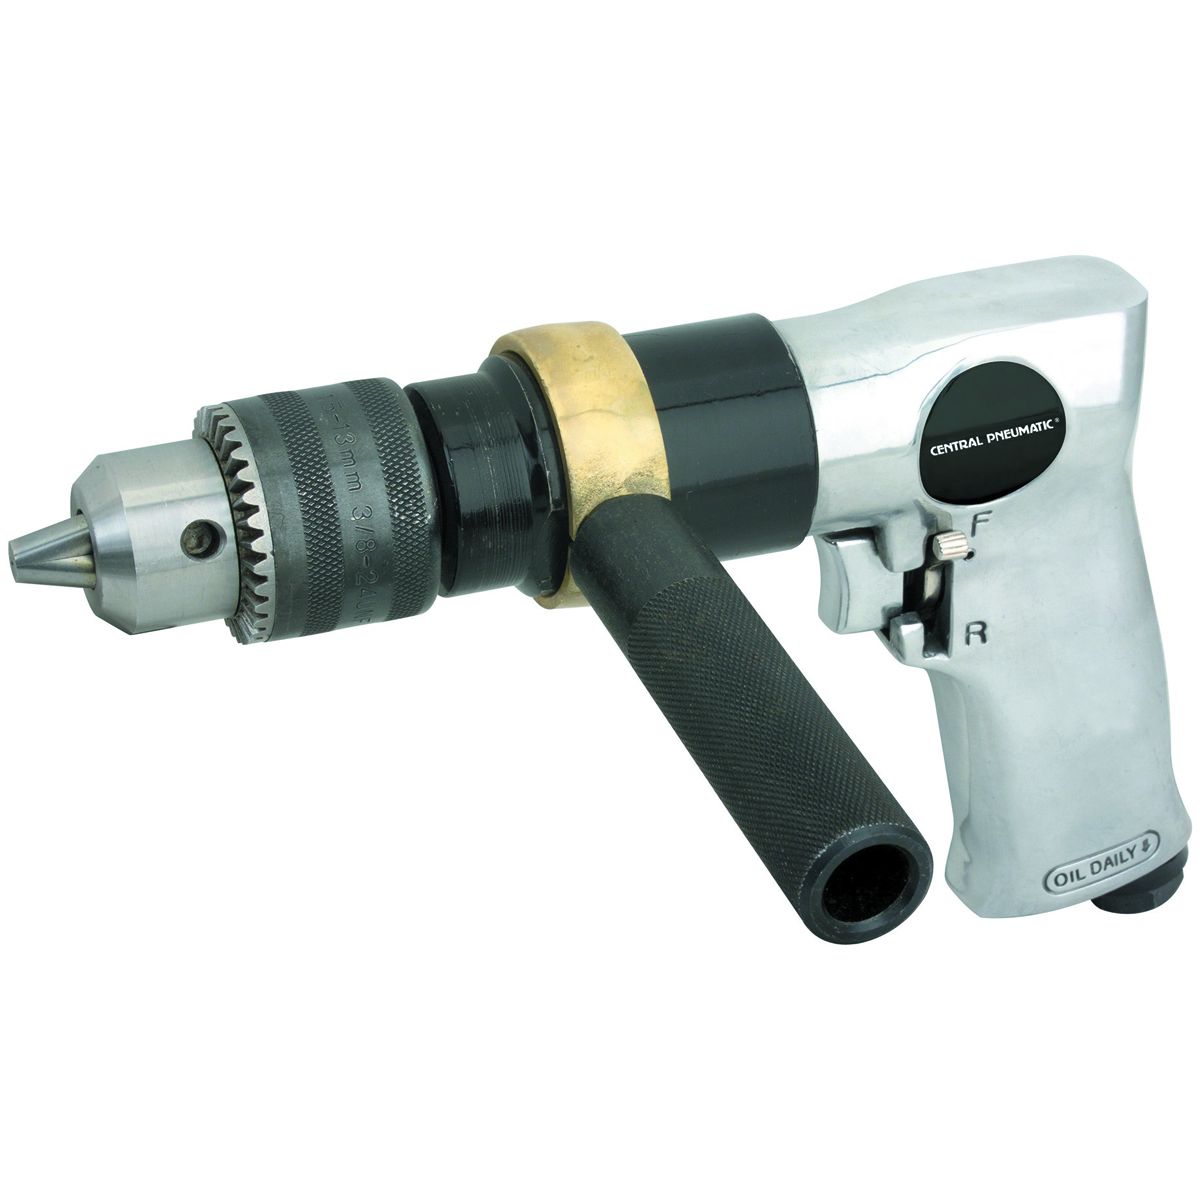 CENTRAL PNEUMATIC 1/2" Reversible Air Drill